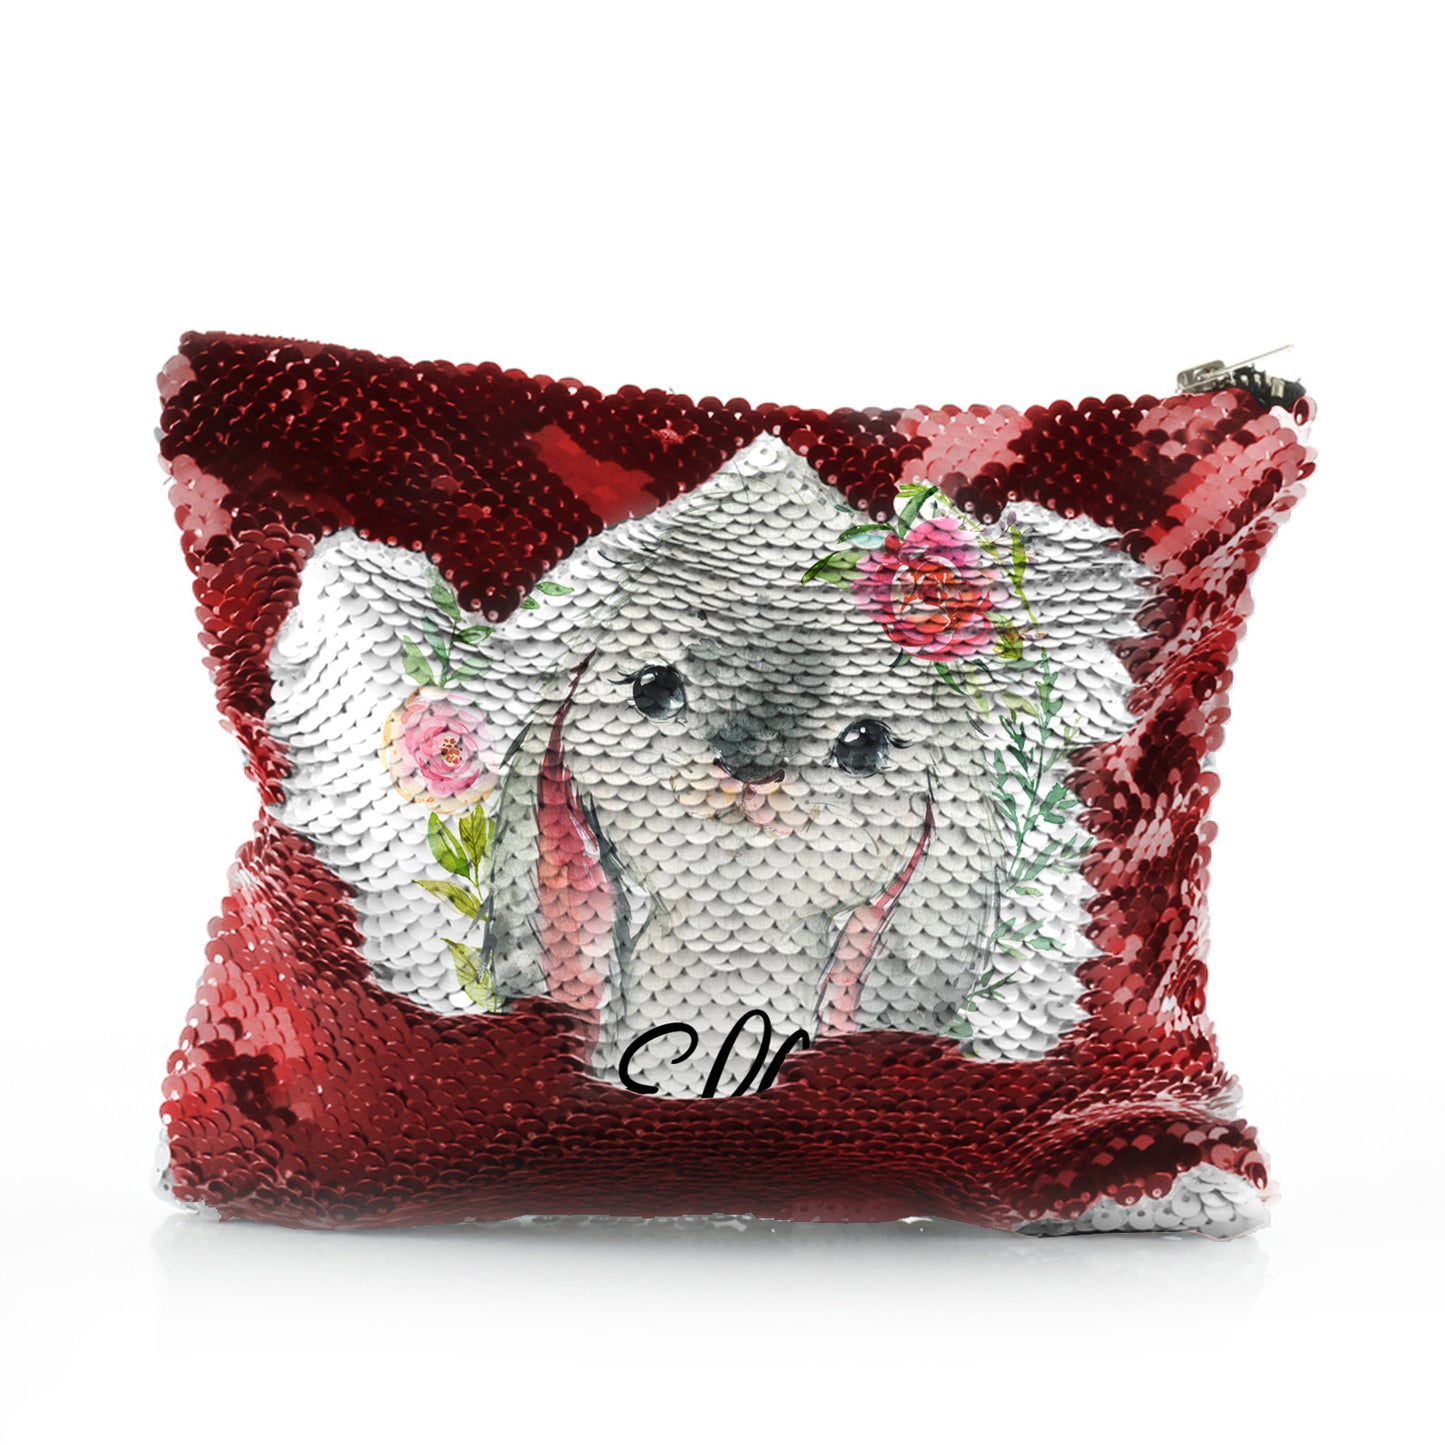 Personalised Sequin Zip Bag with Grey Rabbit Flower Wreath and Cute Text